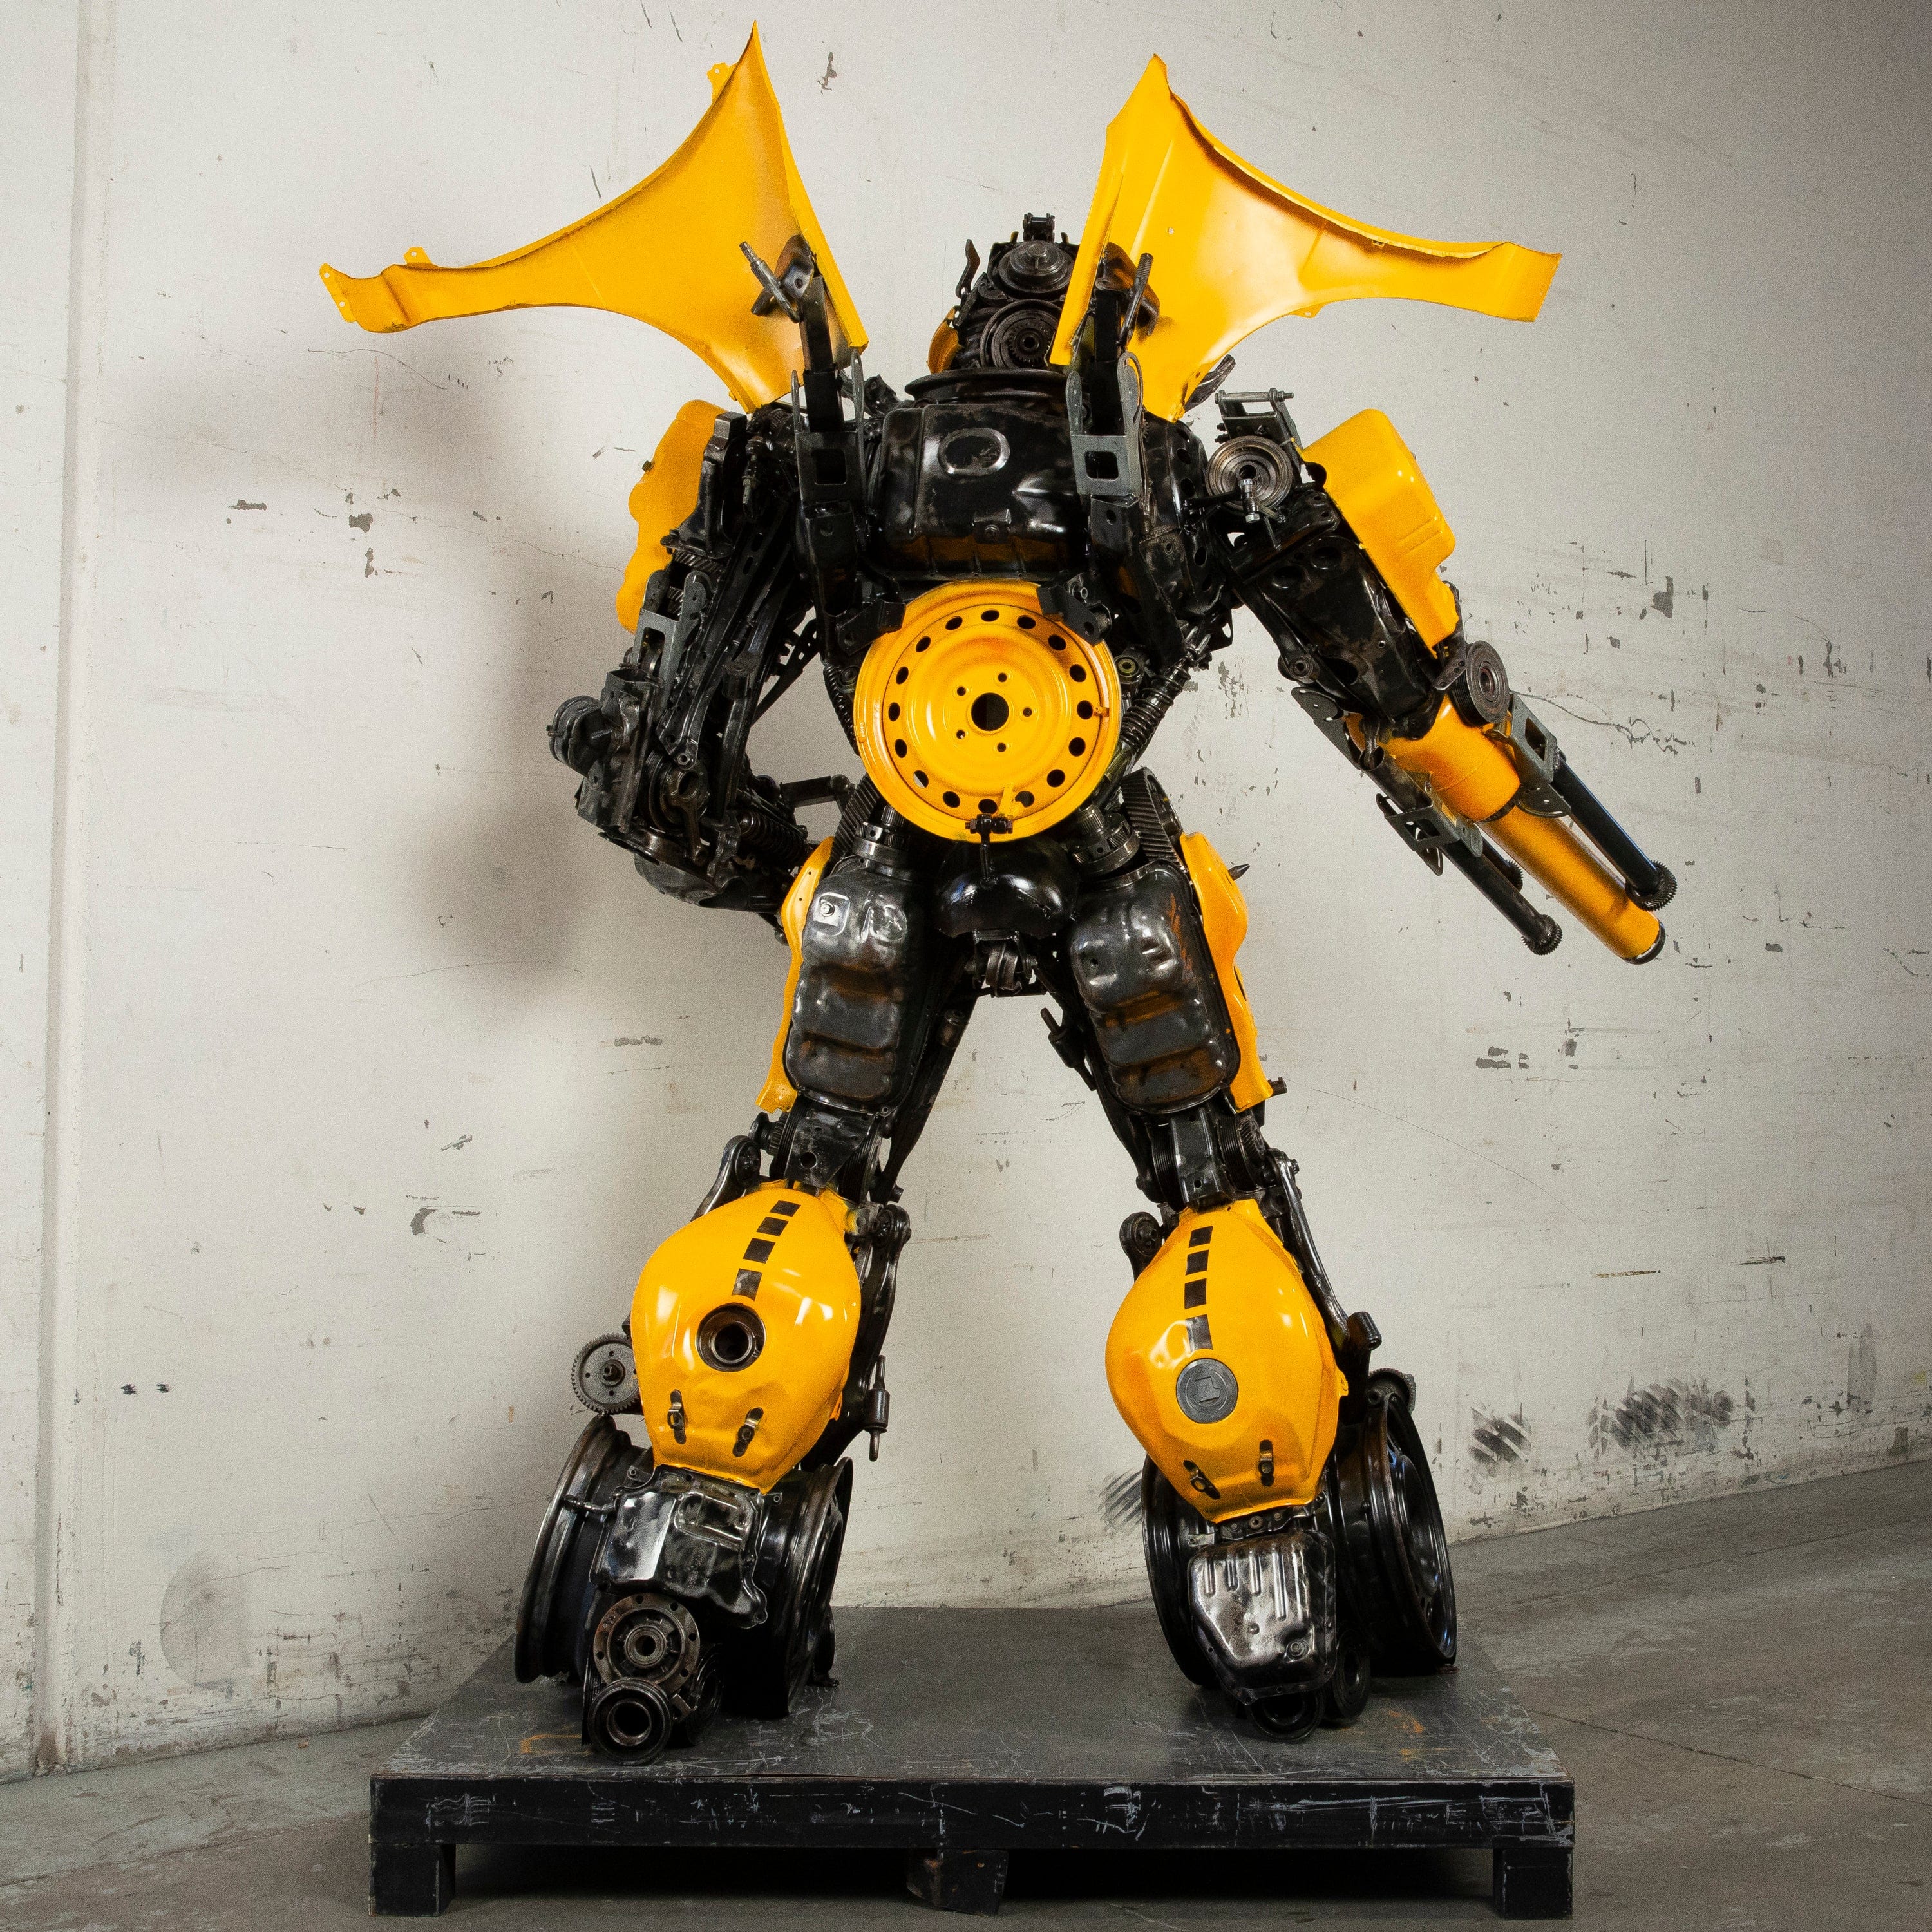 Kalifano Recycled Metal Art 91" Bumblebee Inspired Recycled Metal Art Sculpture RMS-BB230-S33